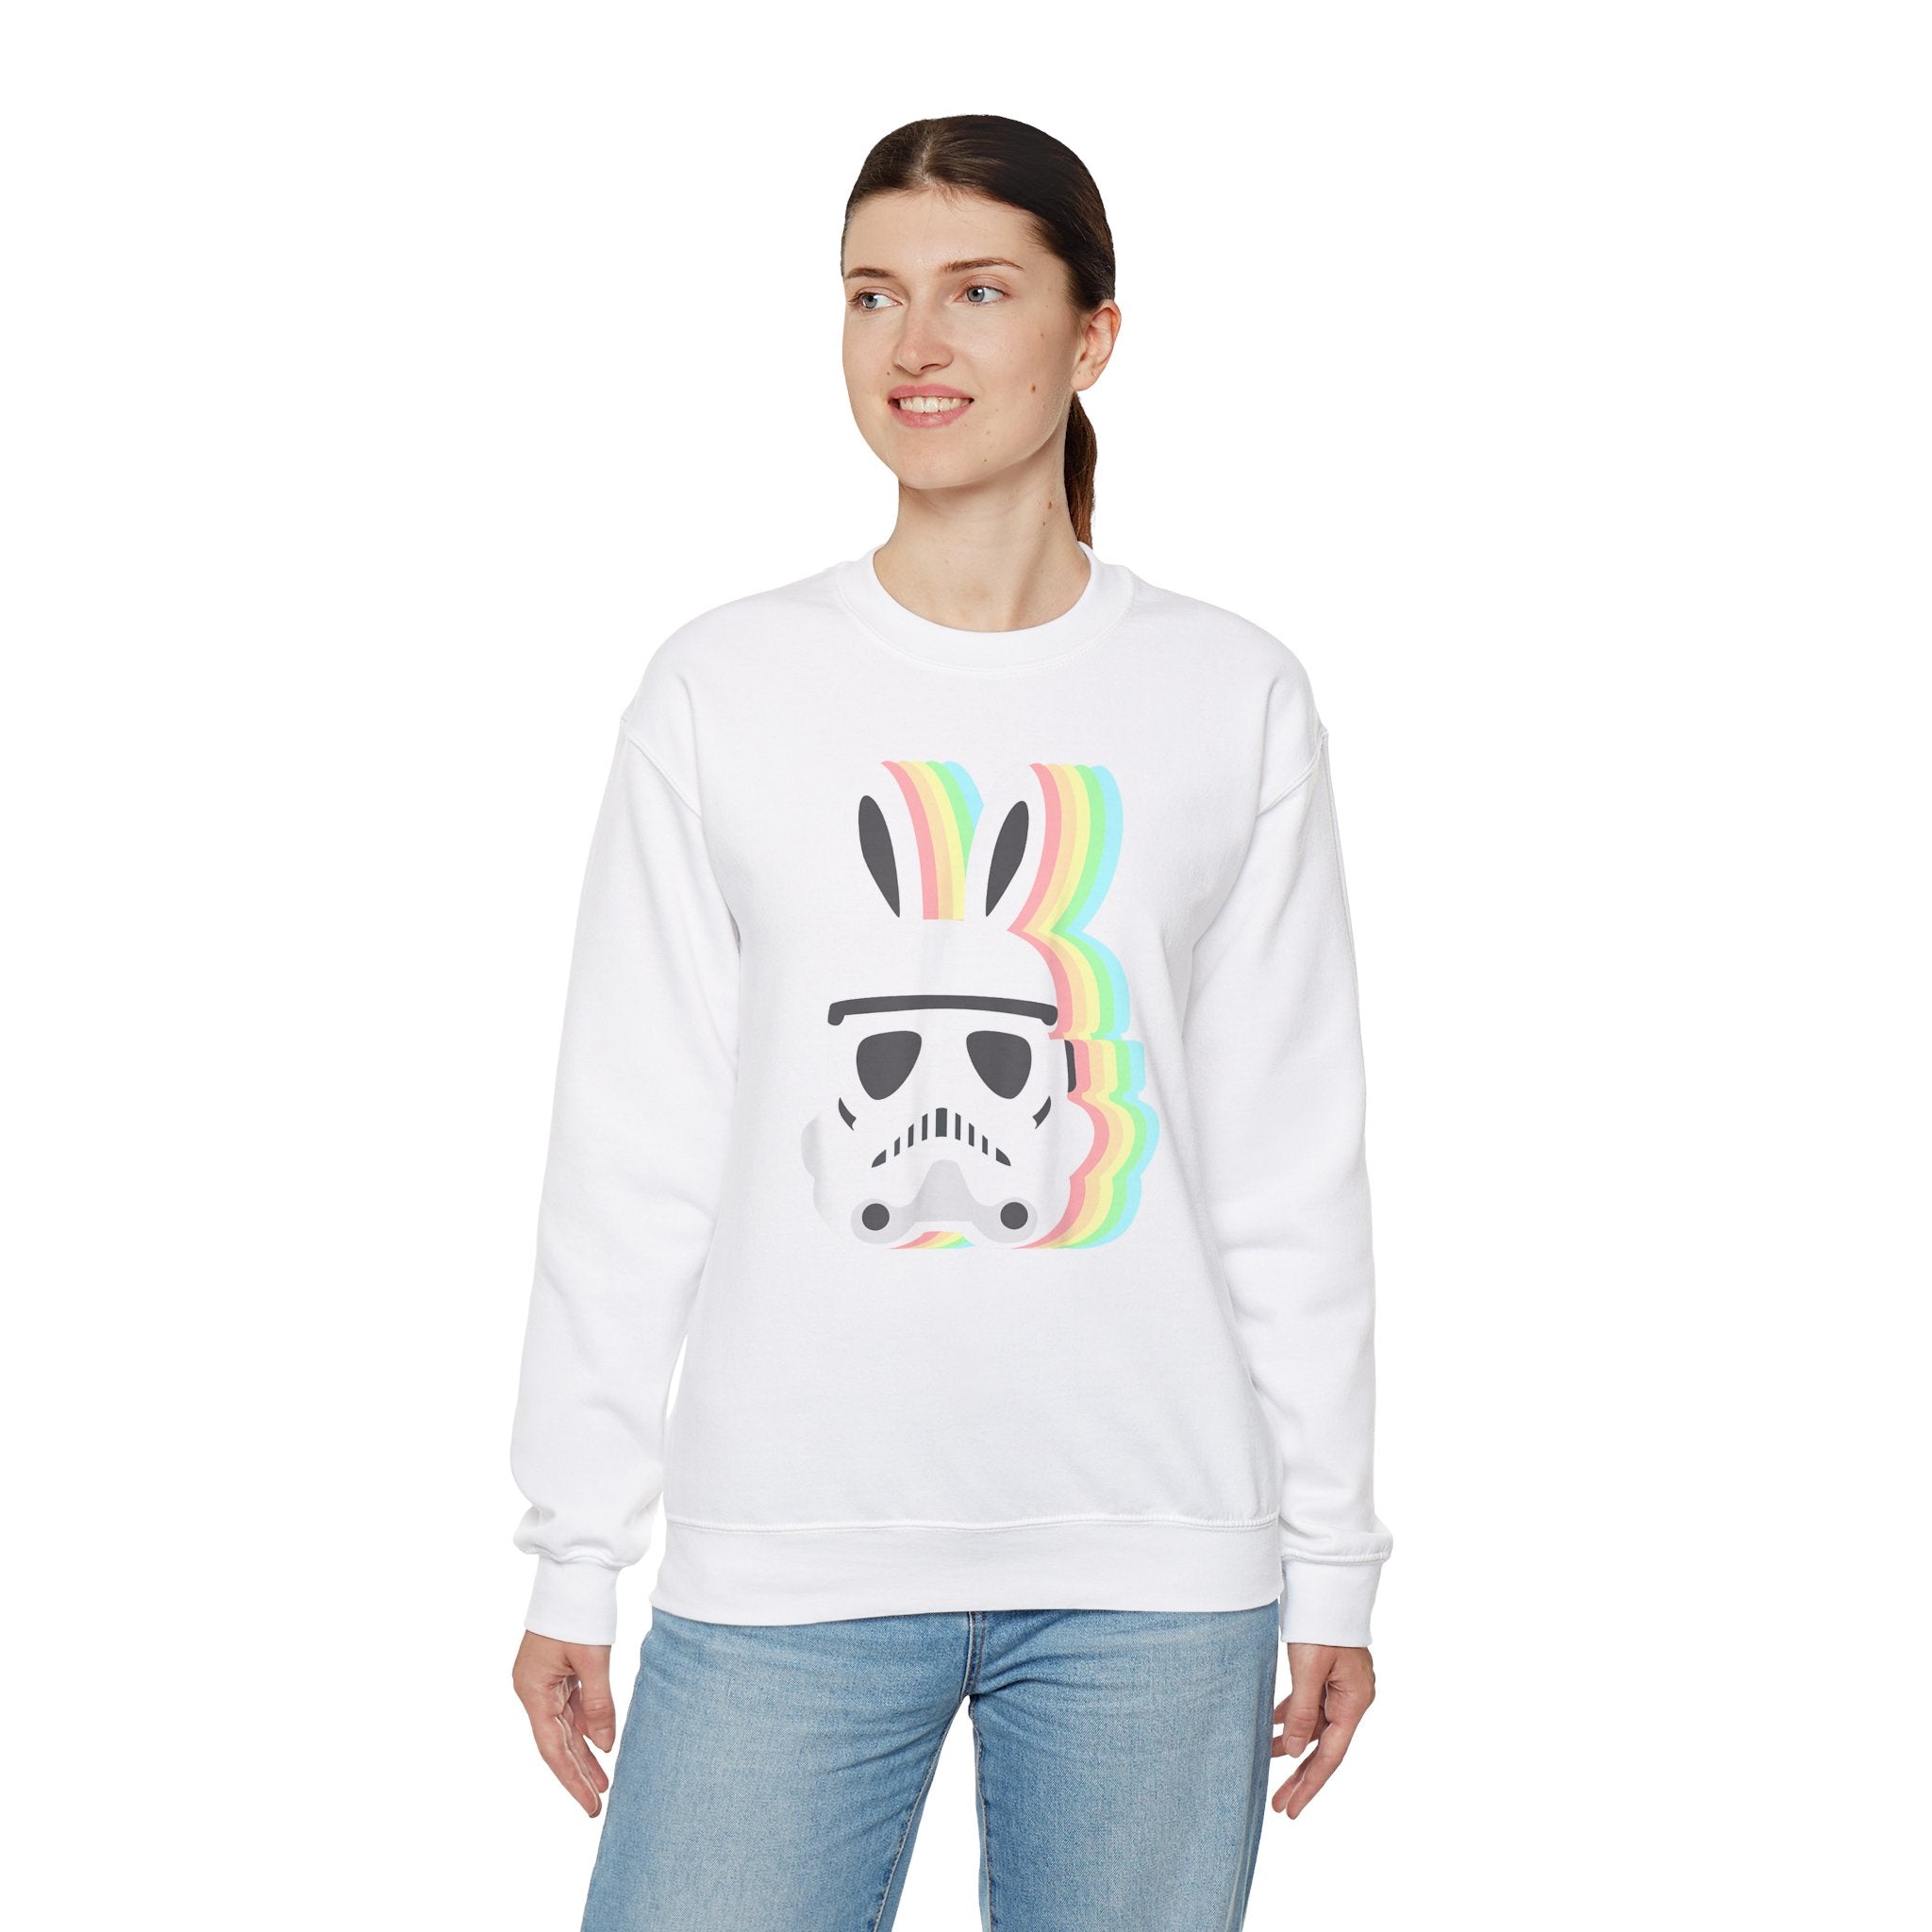 A person wearing a white **Star Wars Easter Stormtrooper - Sweatshirt**, featuring a helmet with bunny ears and a rainbow behind it.